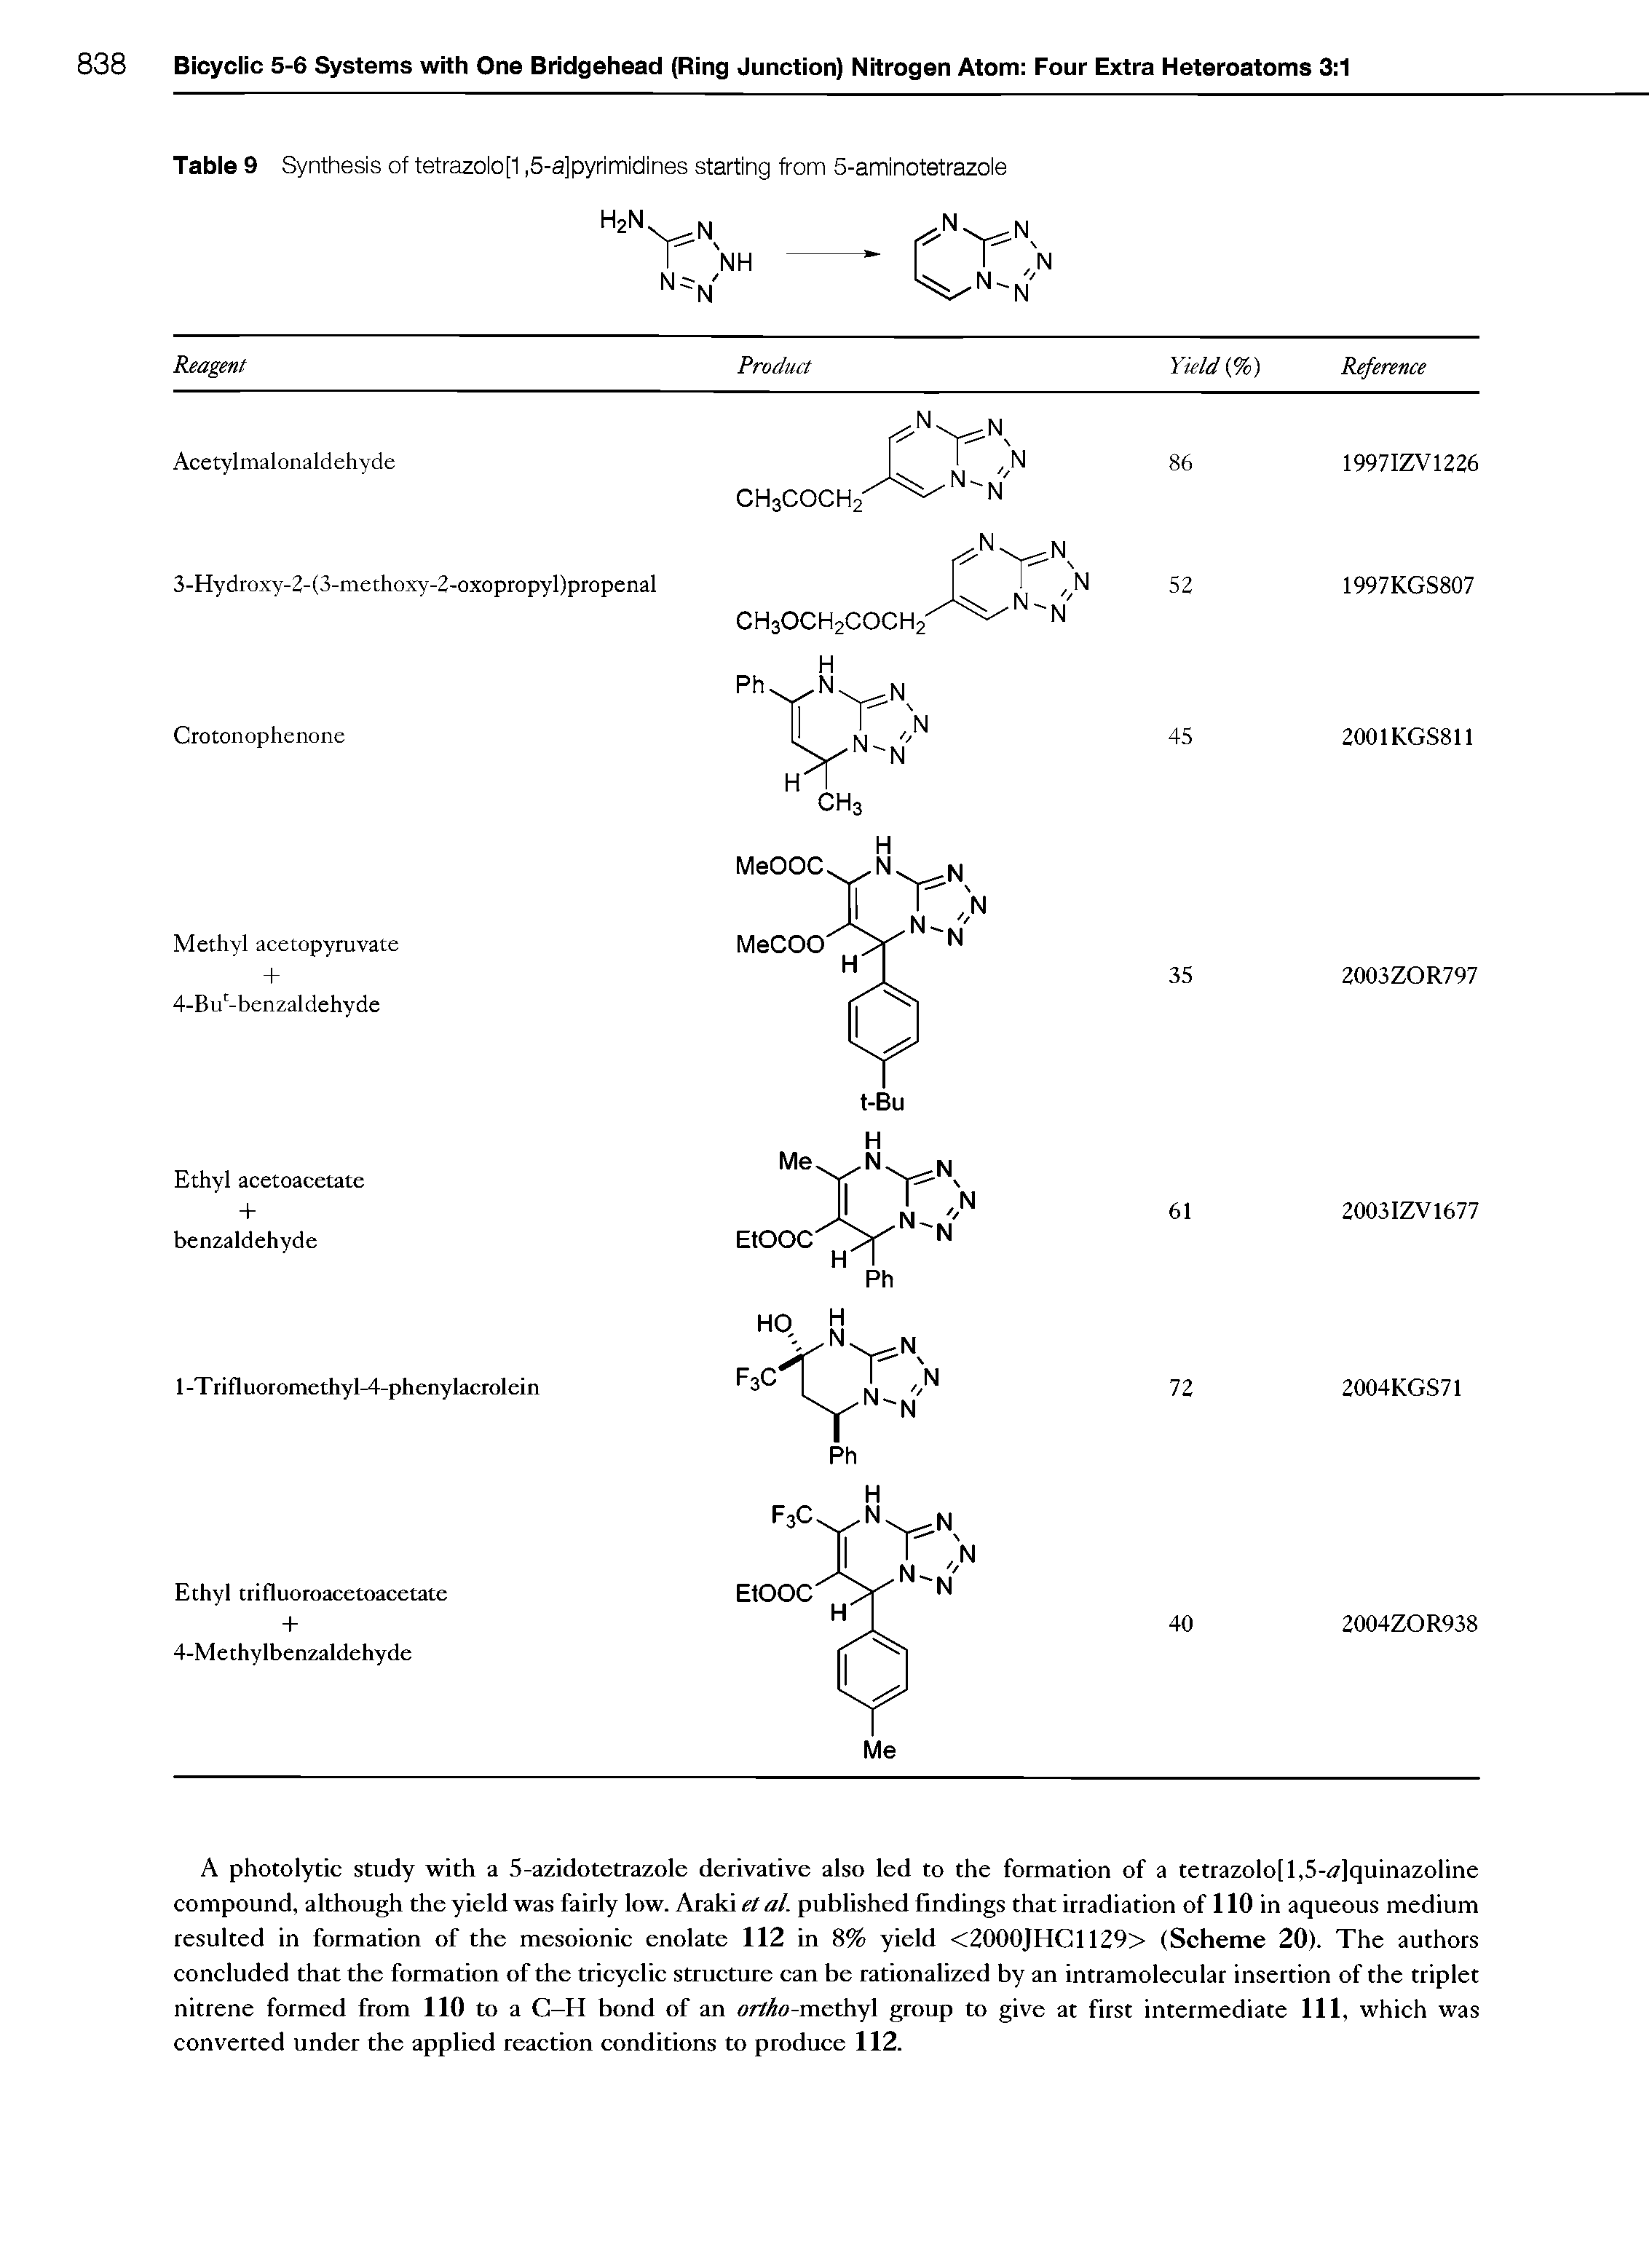 Table 9 Synthesis of tetrazolo[1,5-a]pyrimidines starting from 5-aminotetrazole...